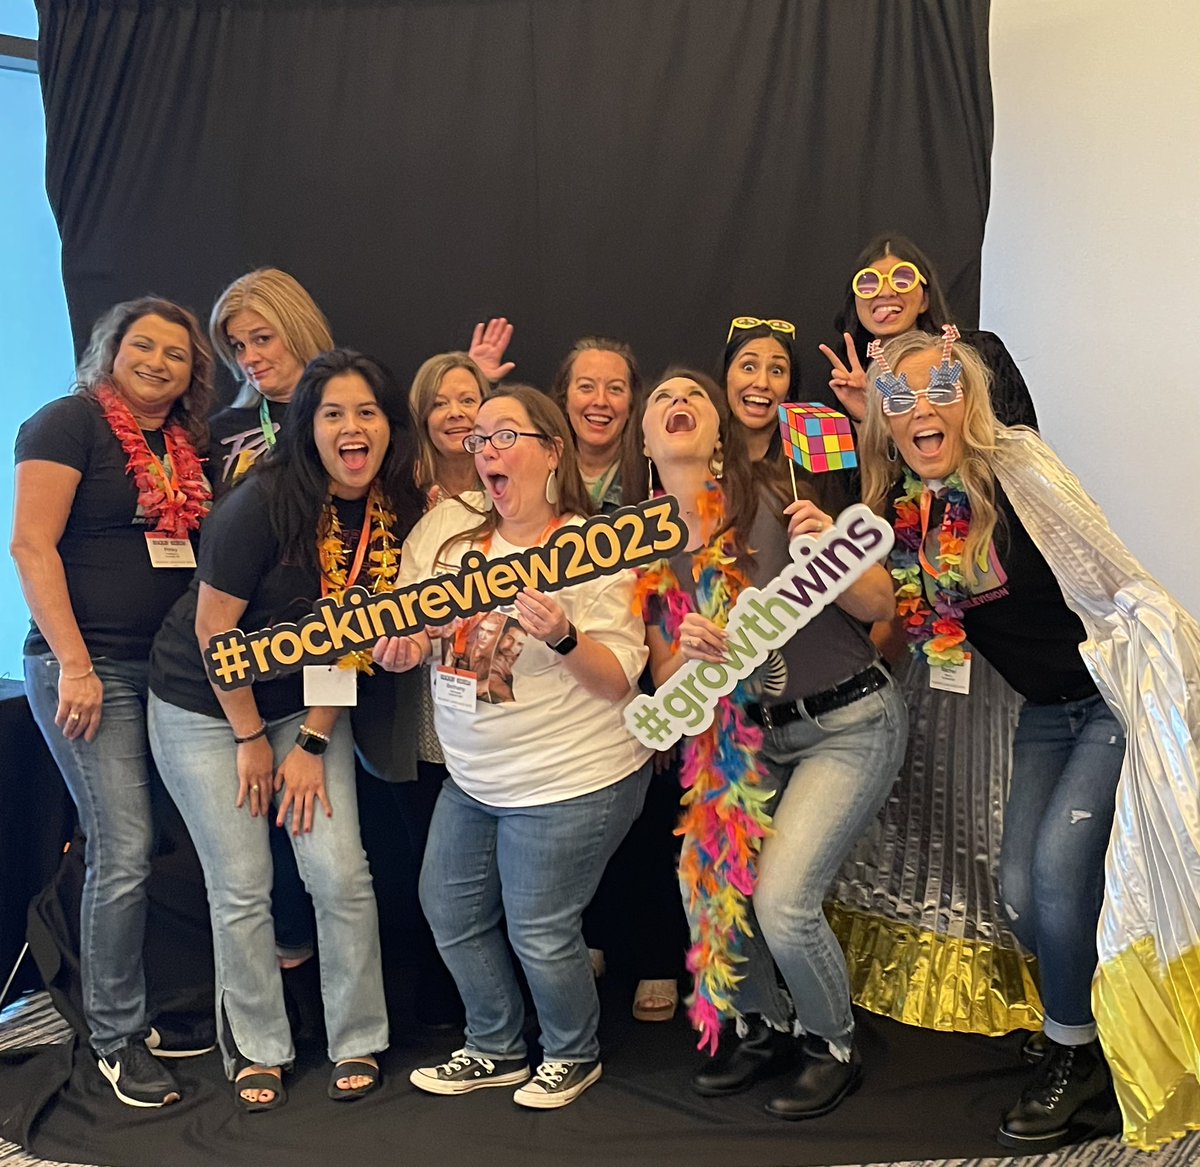 What an awesome group of educators hitting the town of Round Rock for the Rockin’ Review! #rockinreview2023 #growthwins